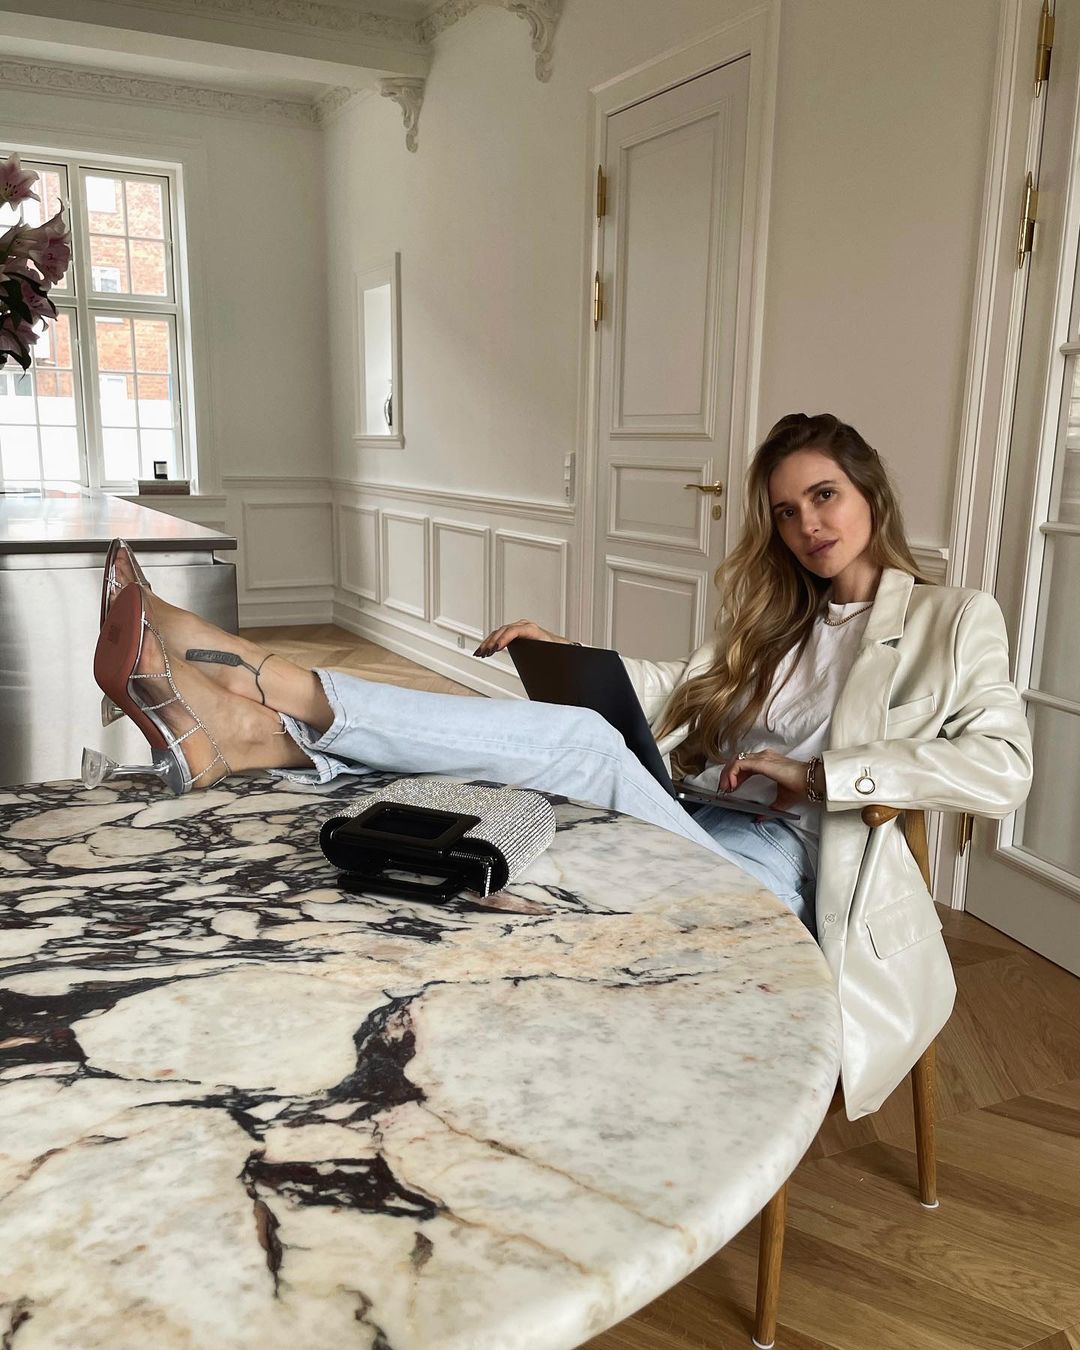 Décor Inspiration | At Home With: Pernille Teisbaek